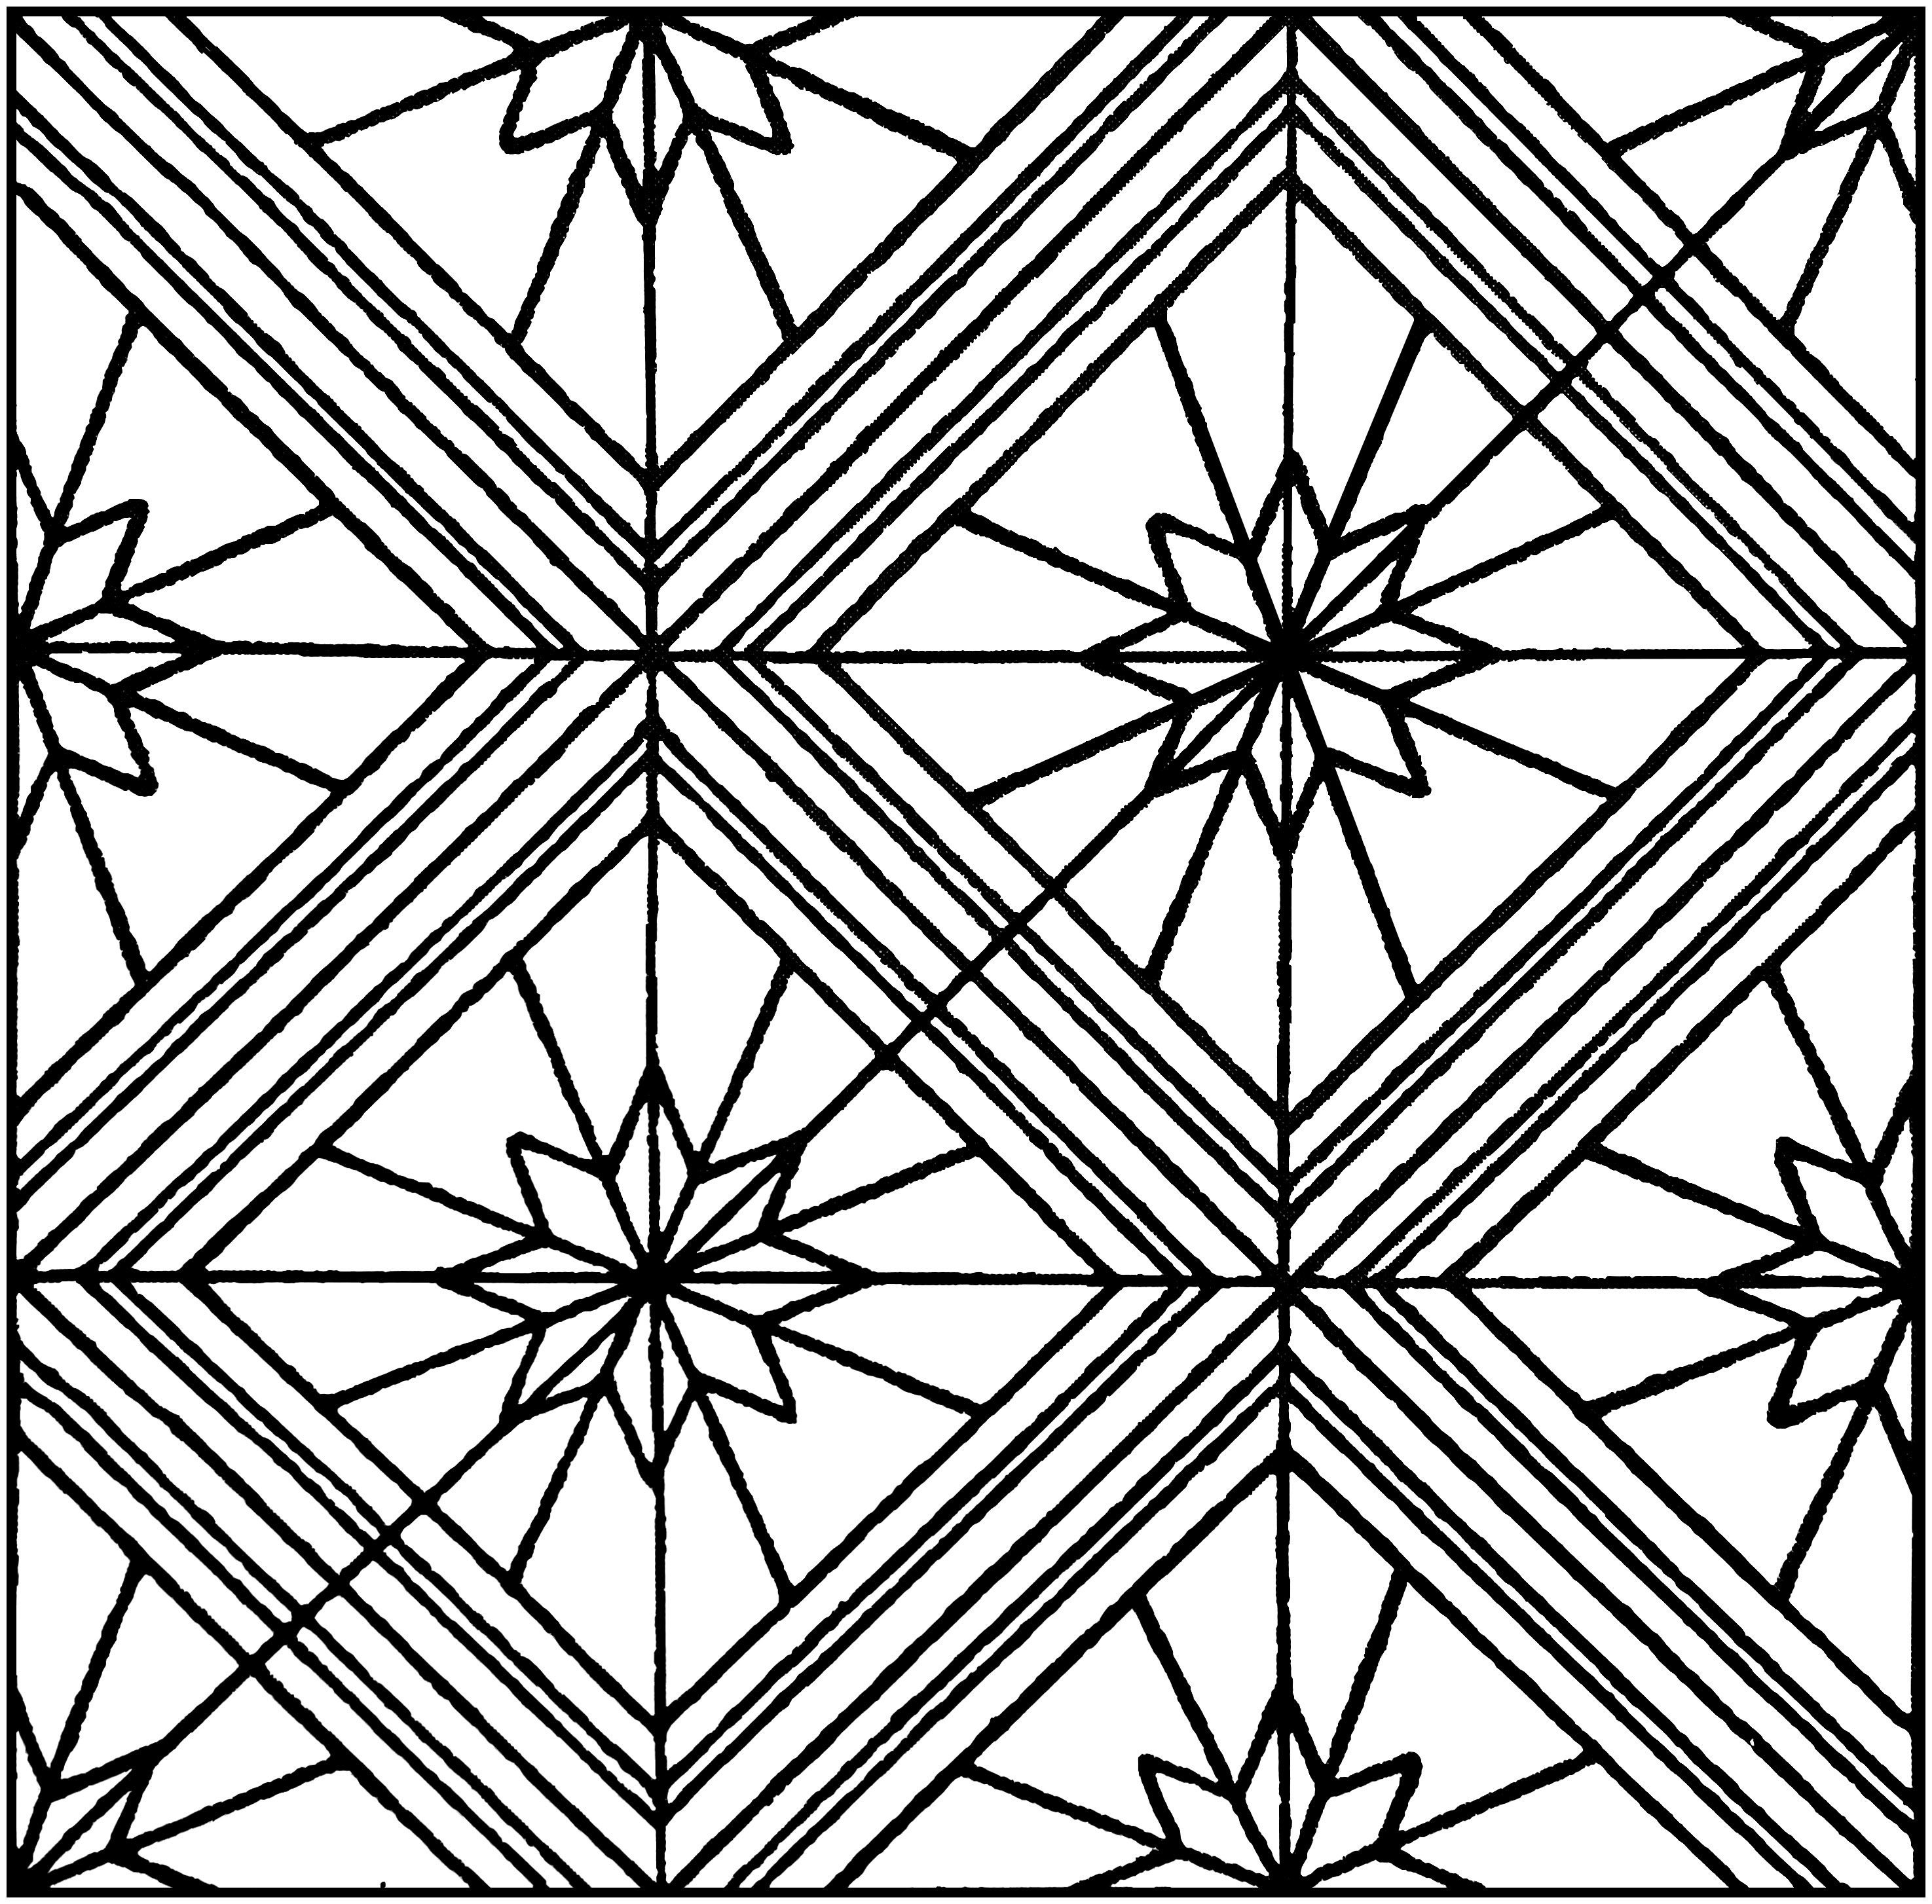 An Azulejo with pretty stars. This azulejo coloring book from Portugal is inspired by a real motif on the facade of a building in Lisbon. It features stars embedded in pretty geometric patterns that are very linear and angular.